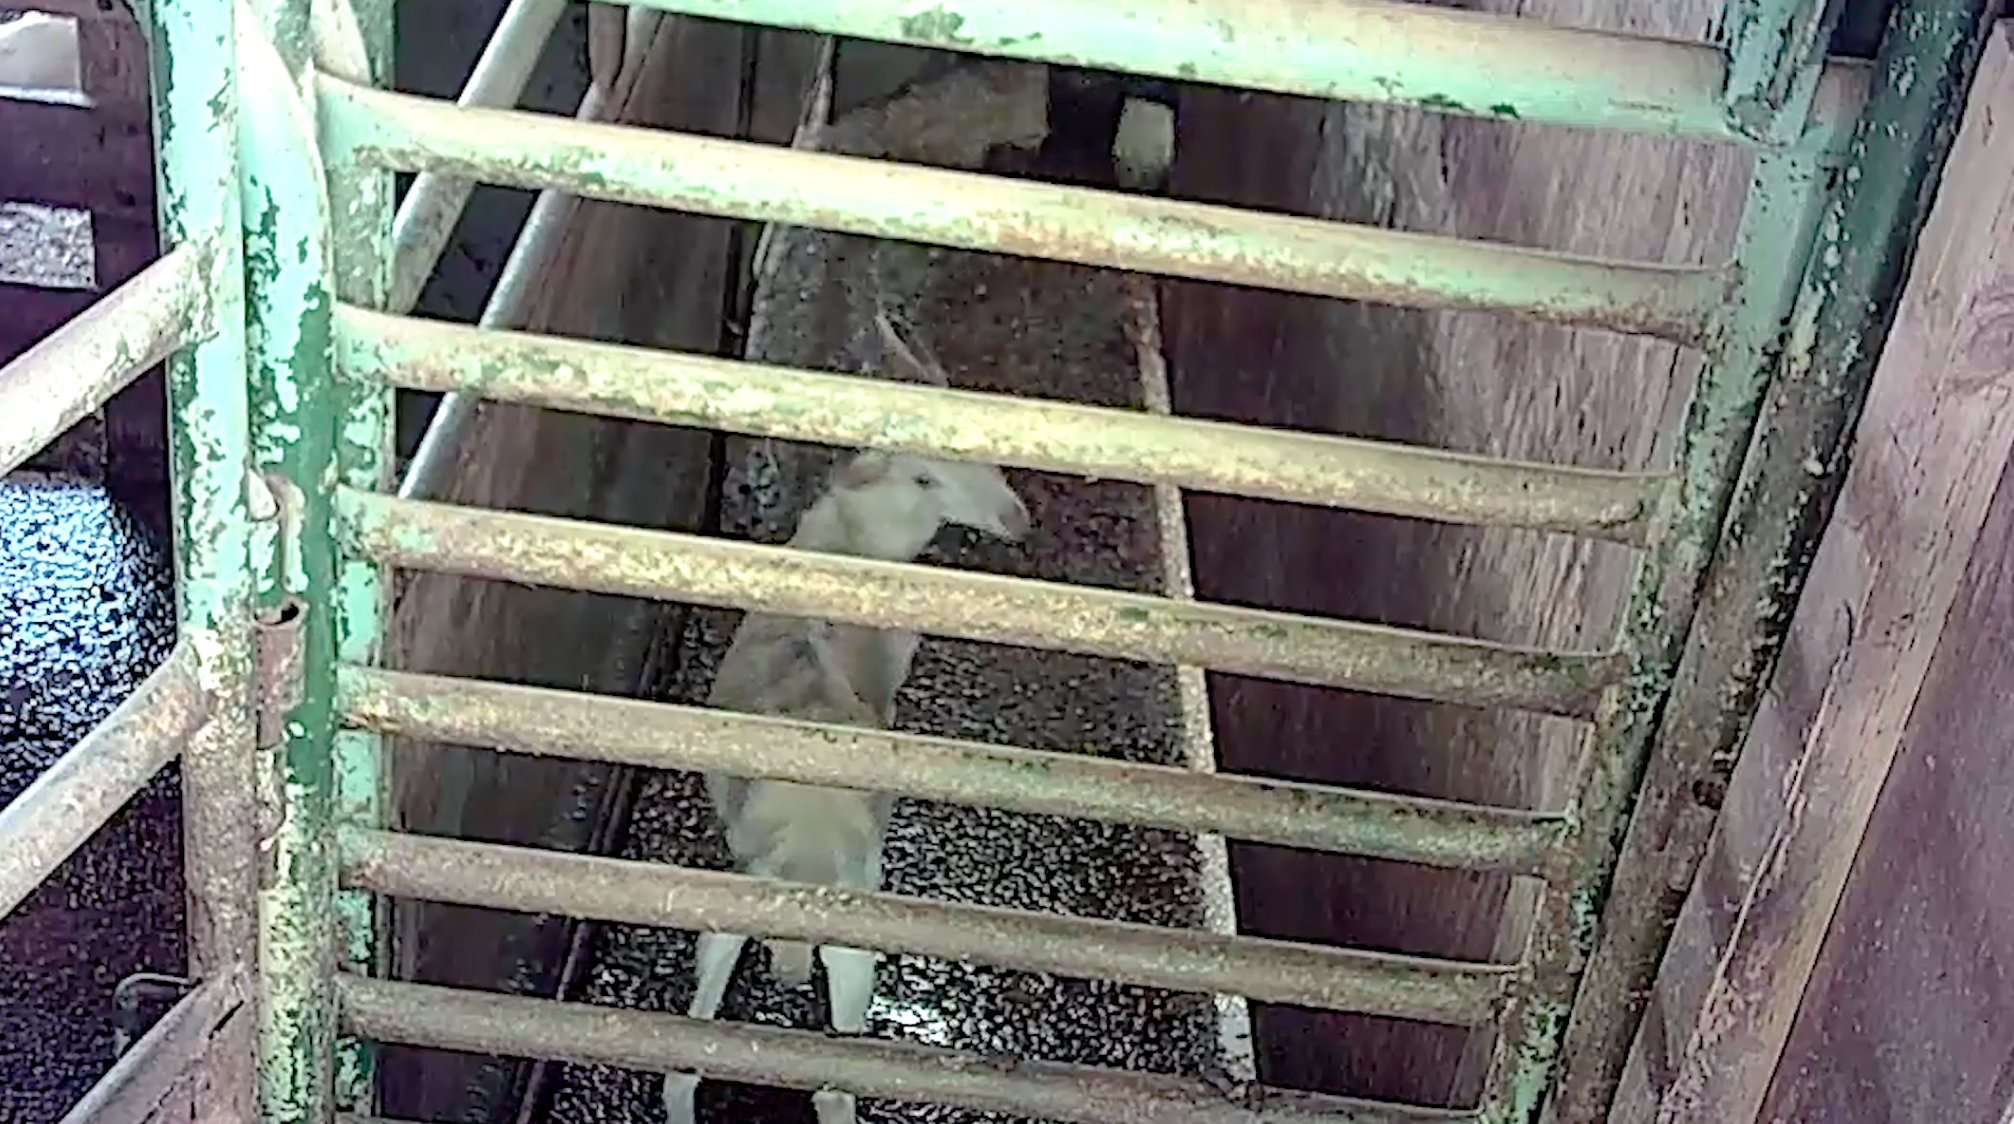 Image shows terrified goat at Meadow Valley Meats slaughterhouse.